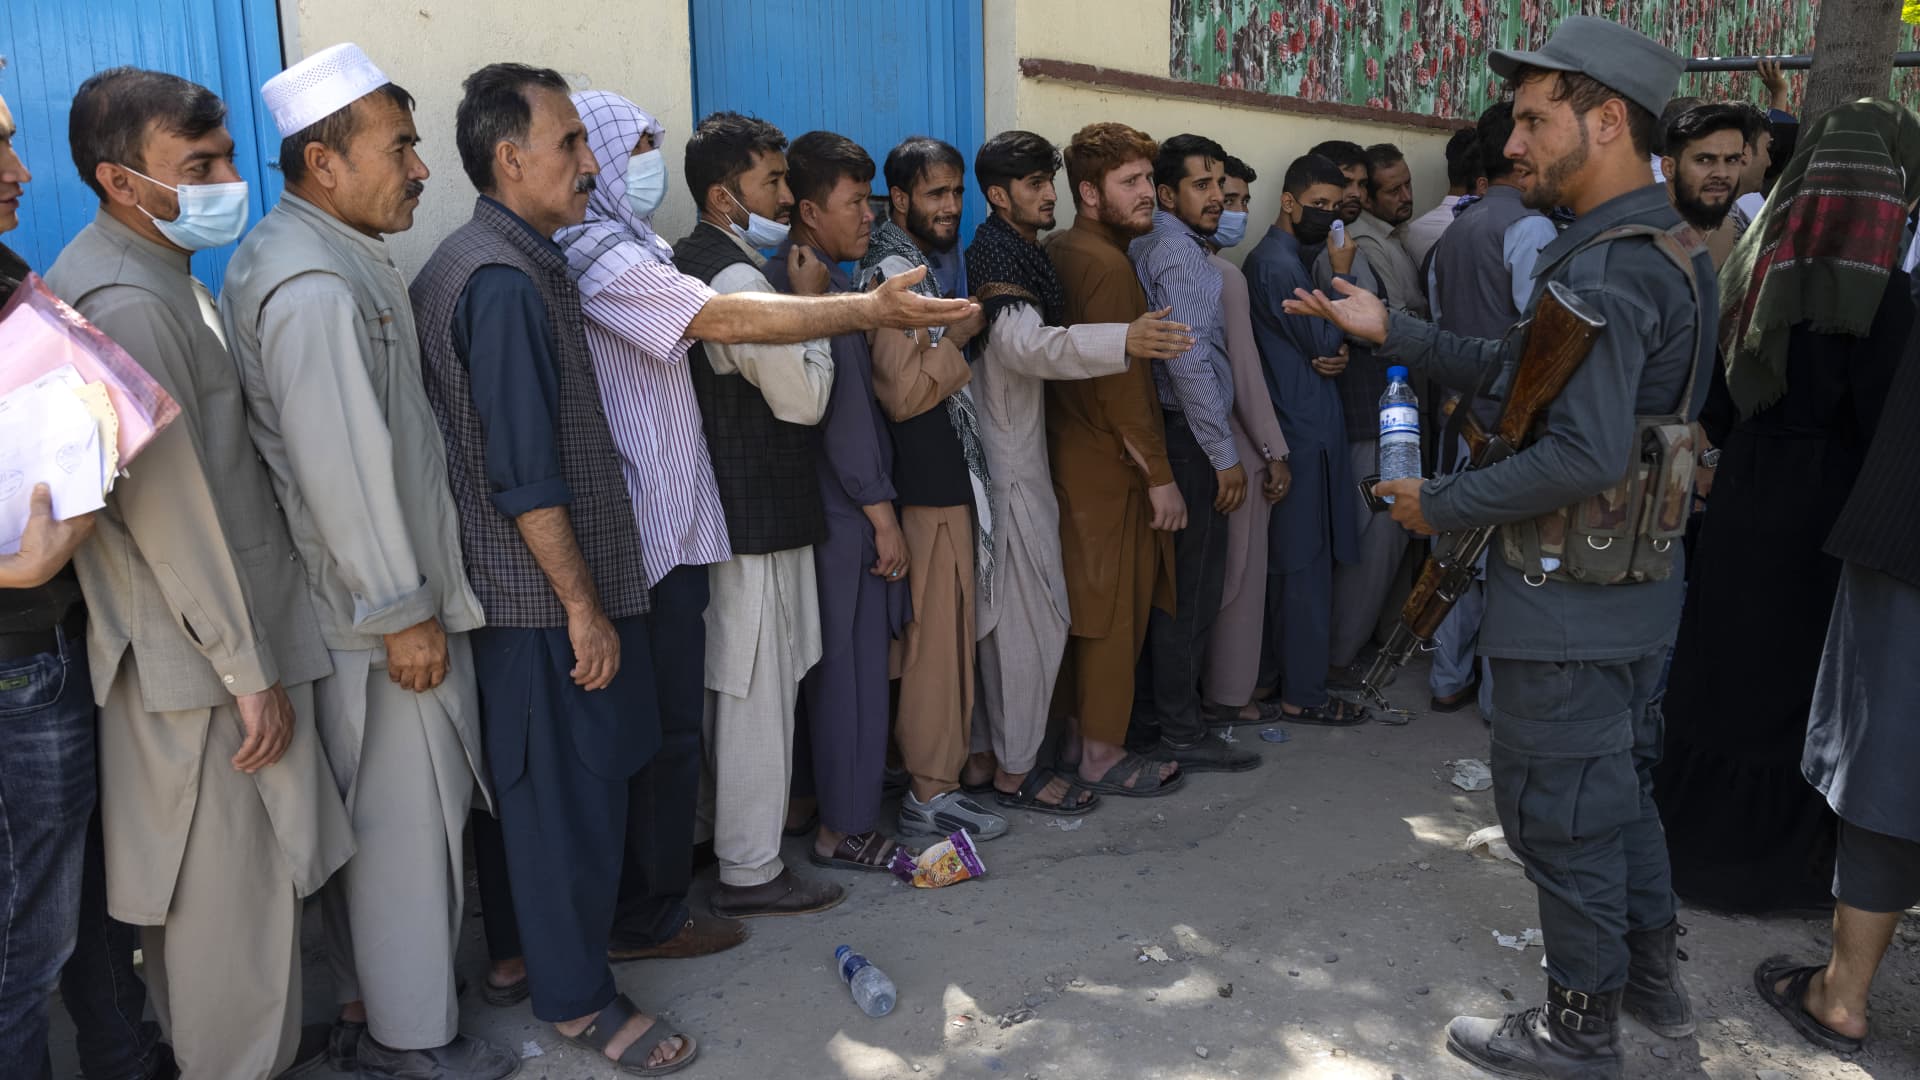 Afghans wait in long lines for hours at the passport office as many are desperate to have their travel documents ready to go on August 14, 2021 in Kabul, Afghanistan.